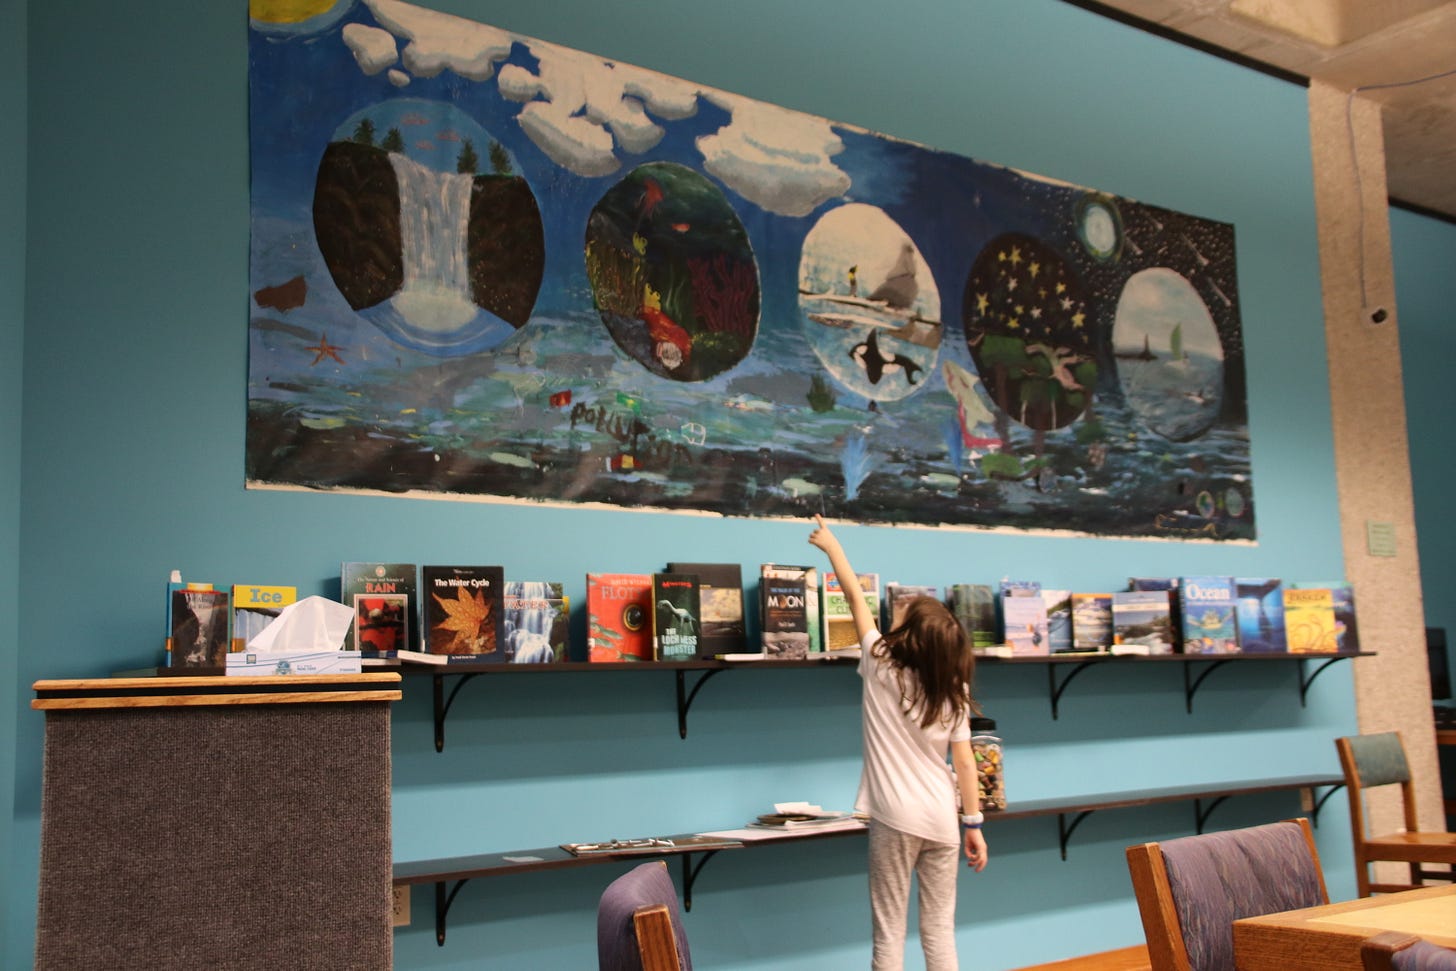 A young child points to a large colorful painting on the wall of a library makerspace.